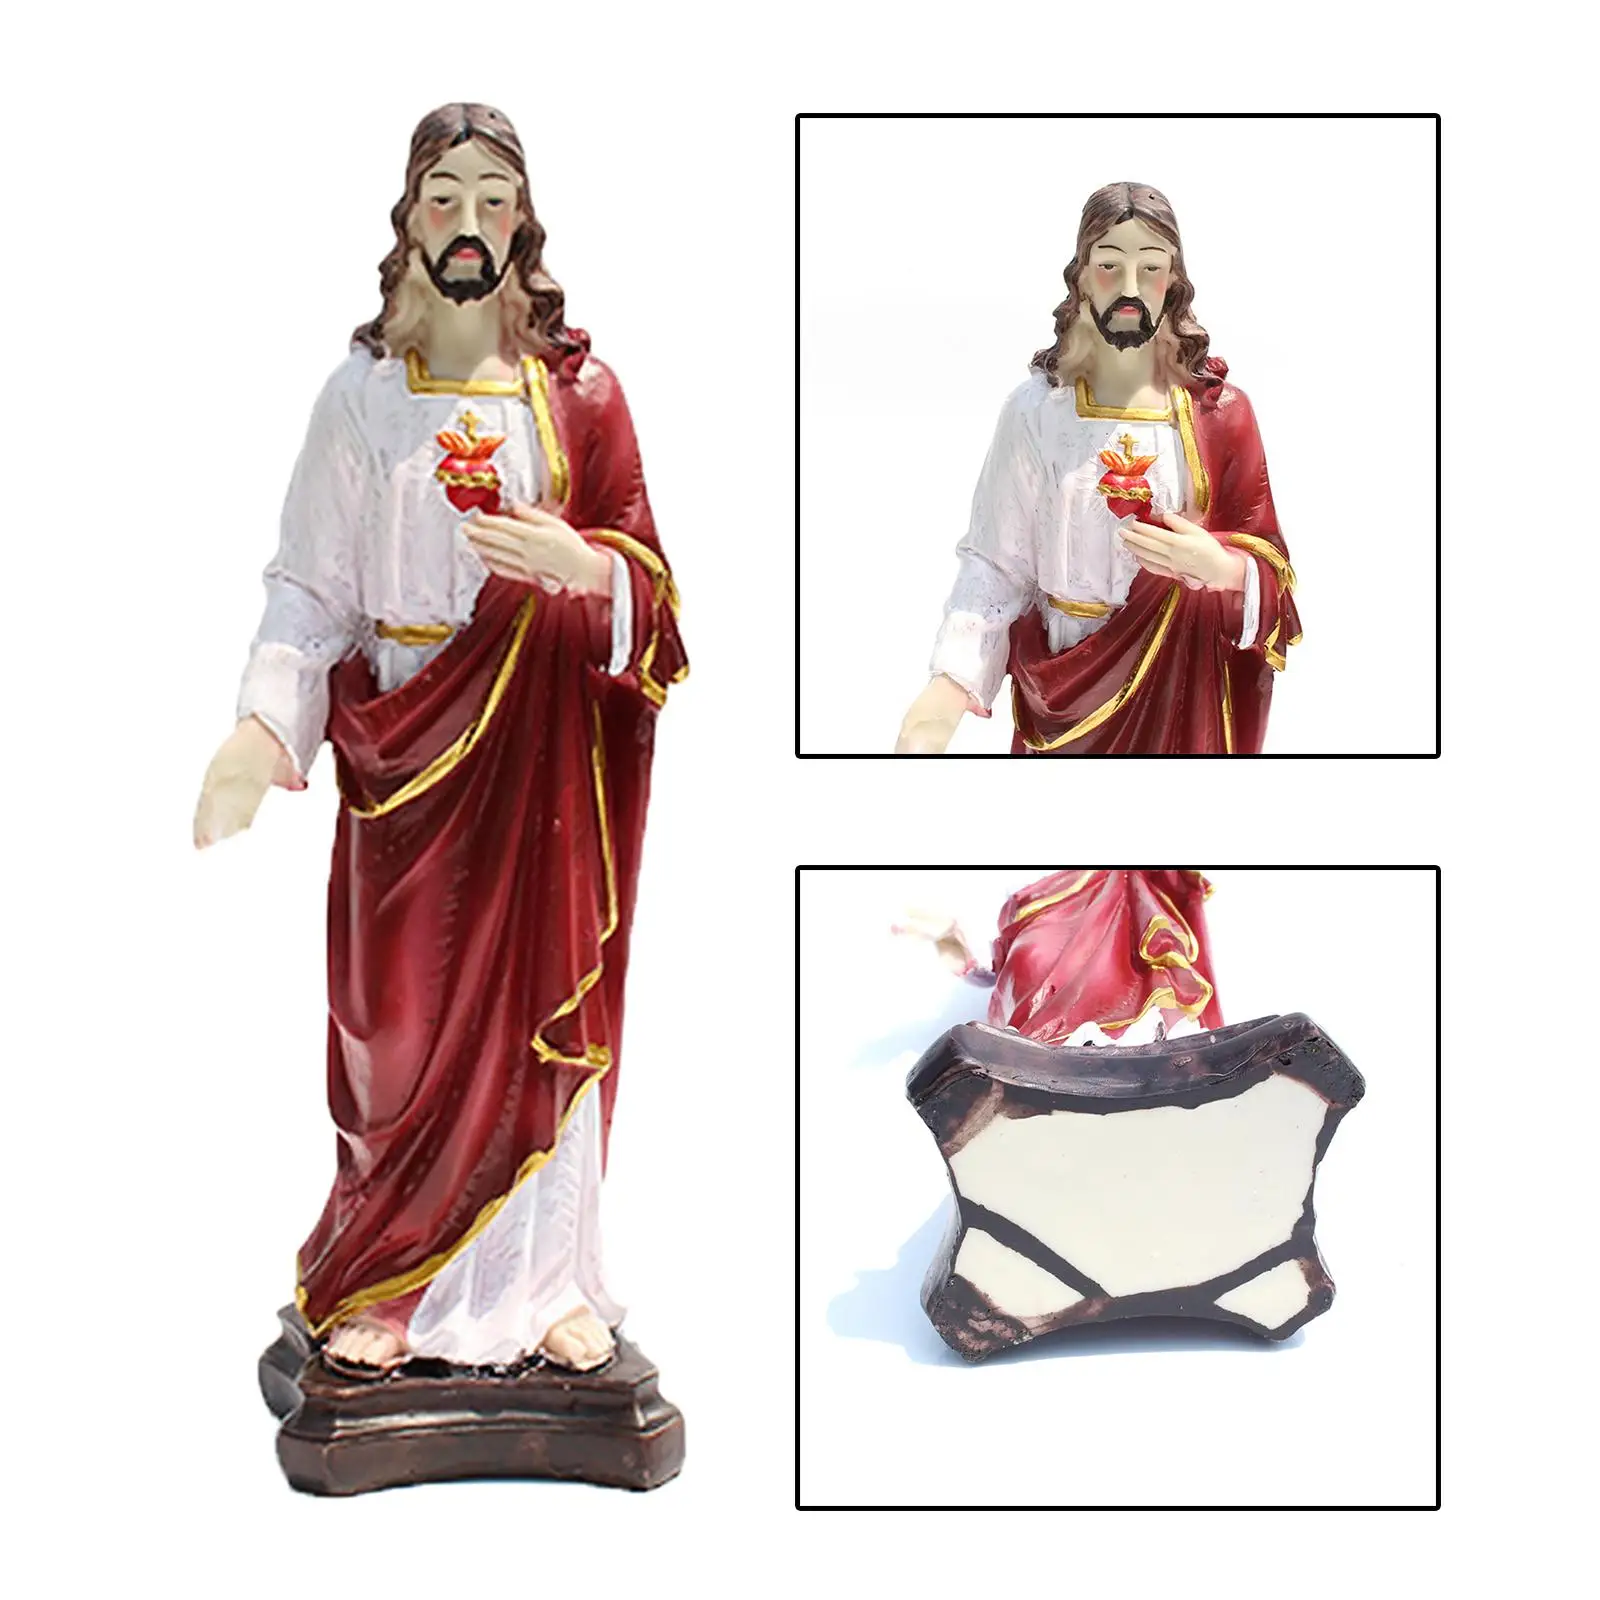 2x Resin Sacred Holy Family Jesus and Virgin Mary Figurine Christ Statues Religious Christian Home Ornament Collectibles